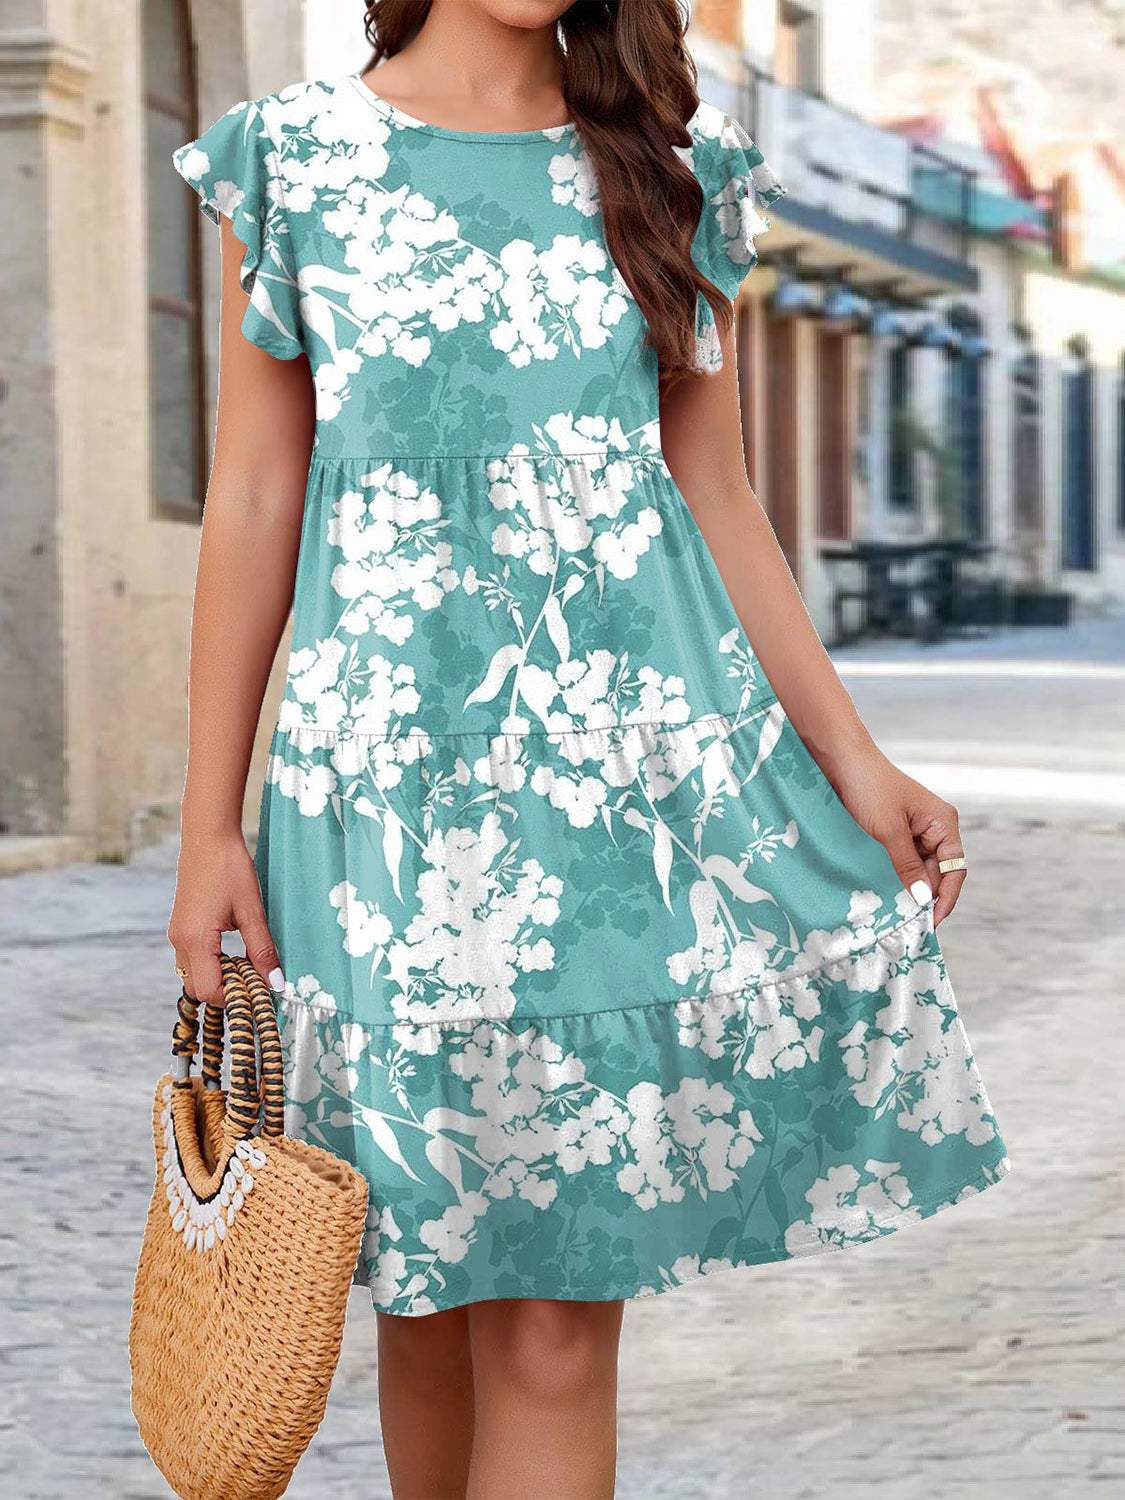 Flaunt summer vibes with our Printed Round Neck Tiered Dress - perfect for any occasion. Available in 6 fresh colors.